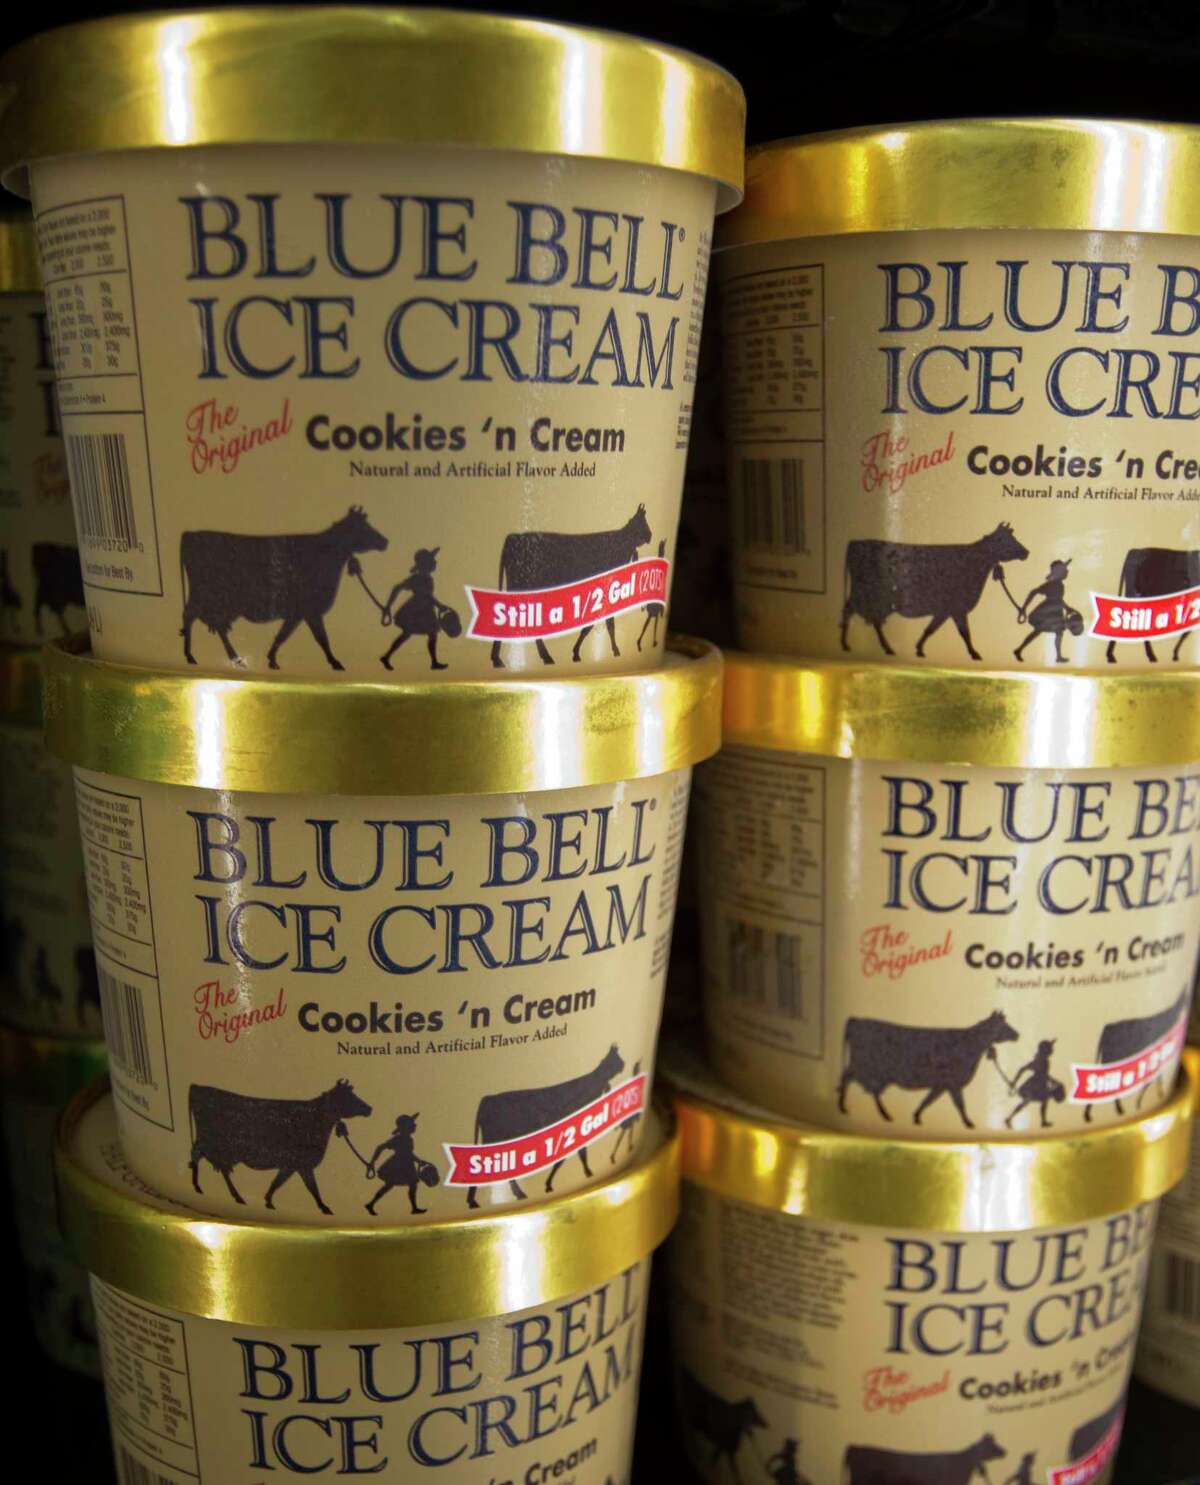 After the recall, Blue Bell "had not resumed any type of tour until just a few weeks ago," spokeswoman Jenny Van Dorf says.